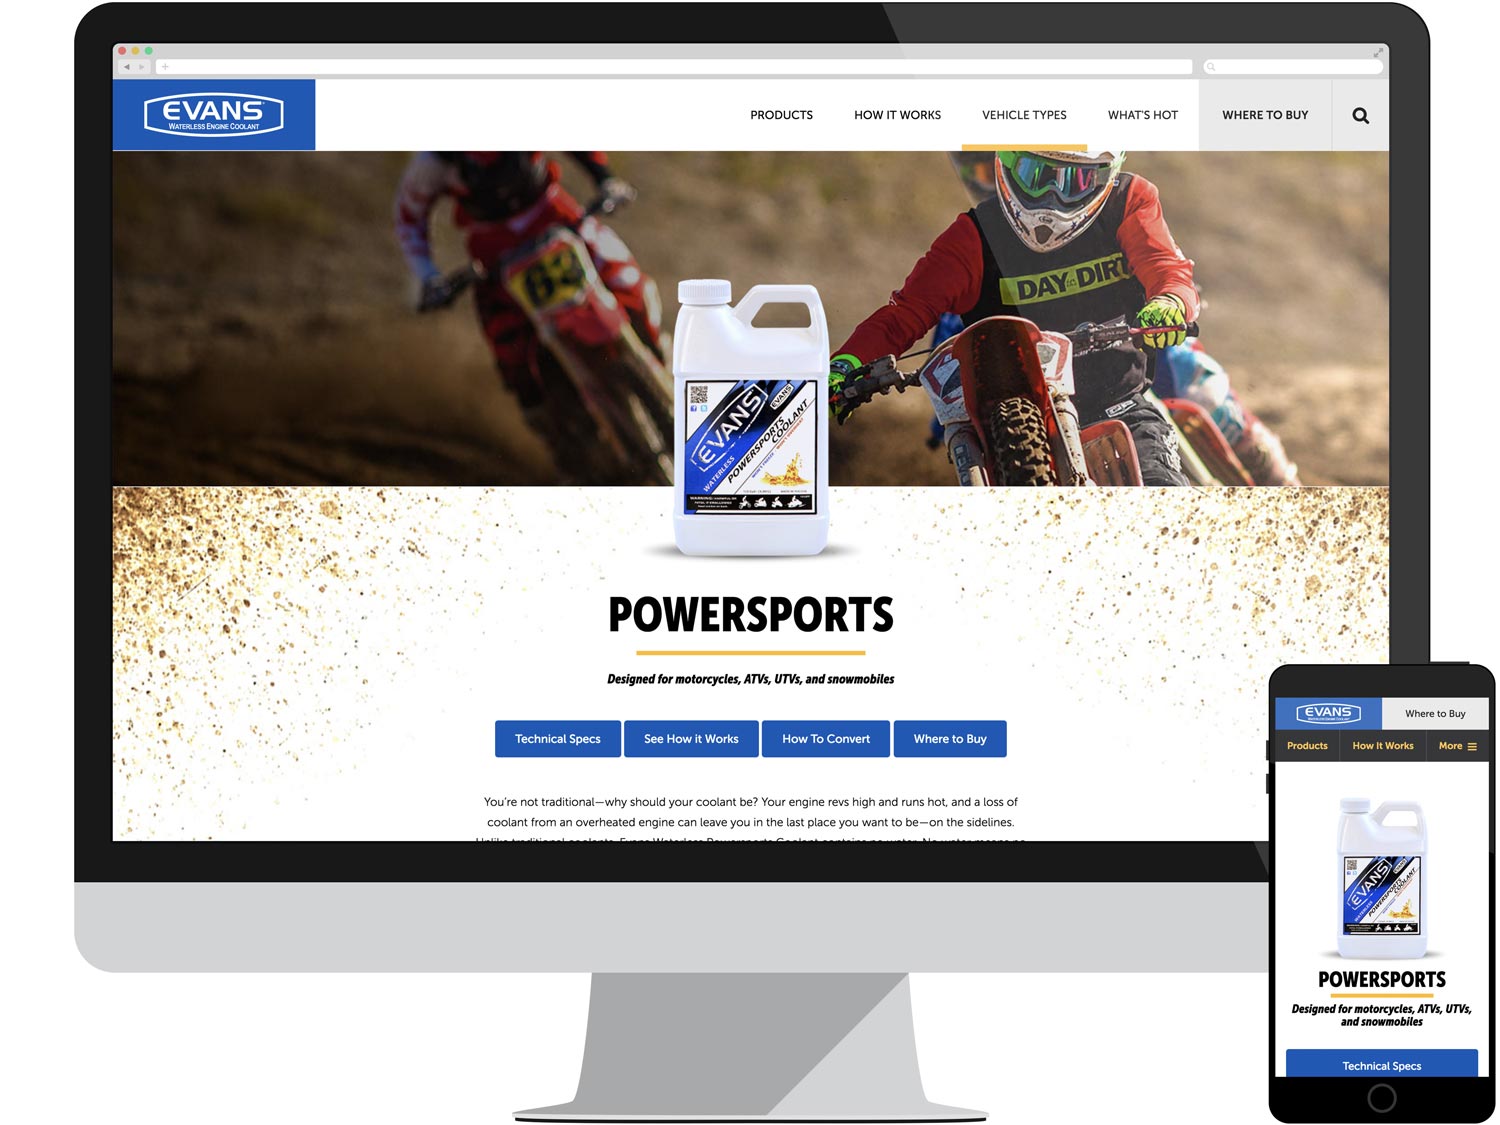 Audience Page - Powersports